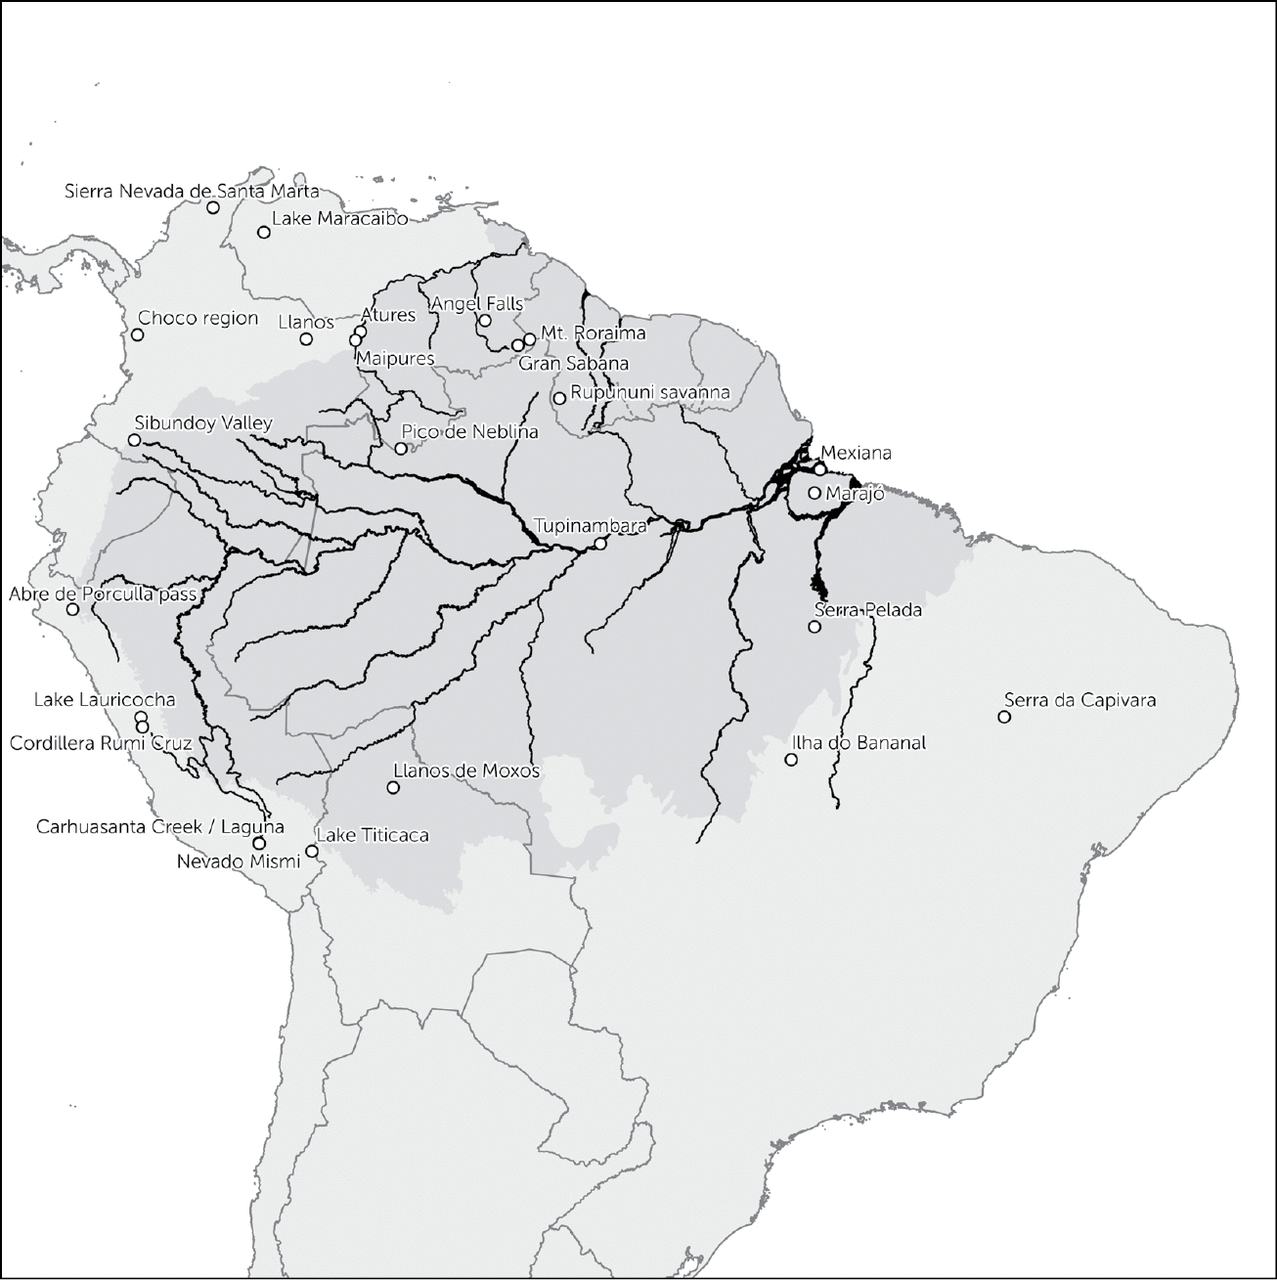 Map 2 Map of northern South America featuring locales mentioned in the text - photo 4